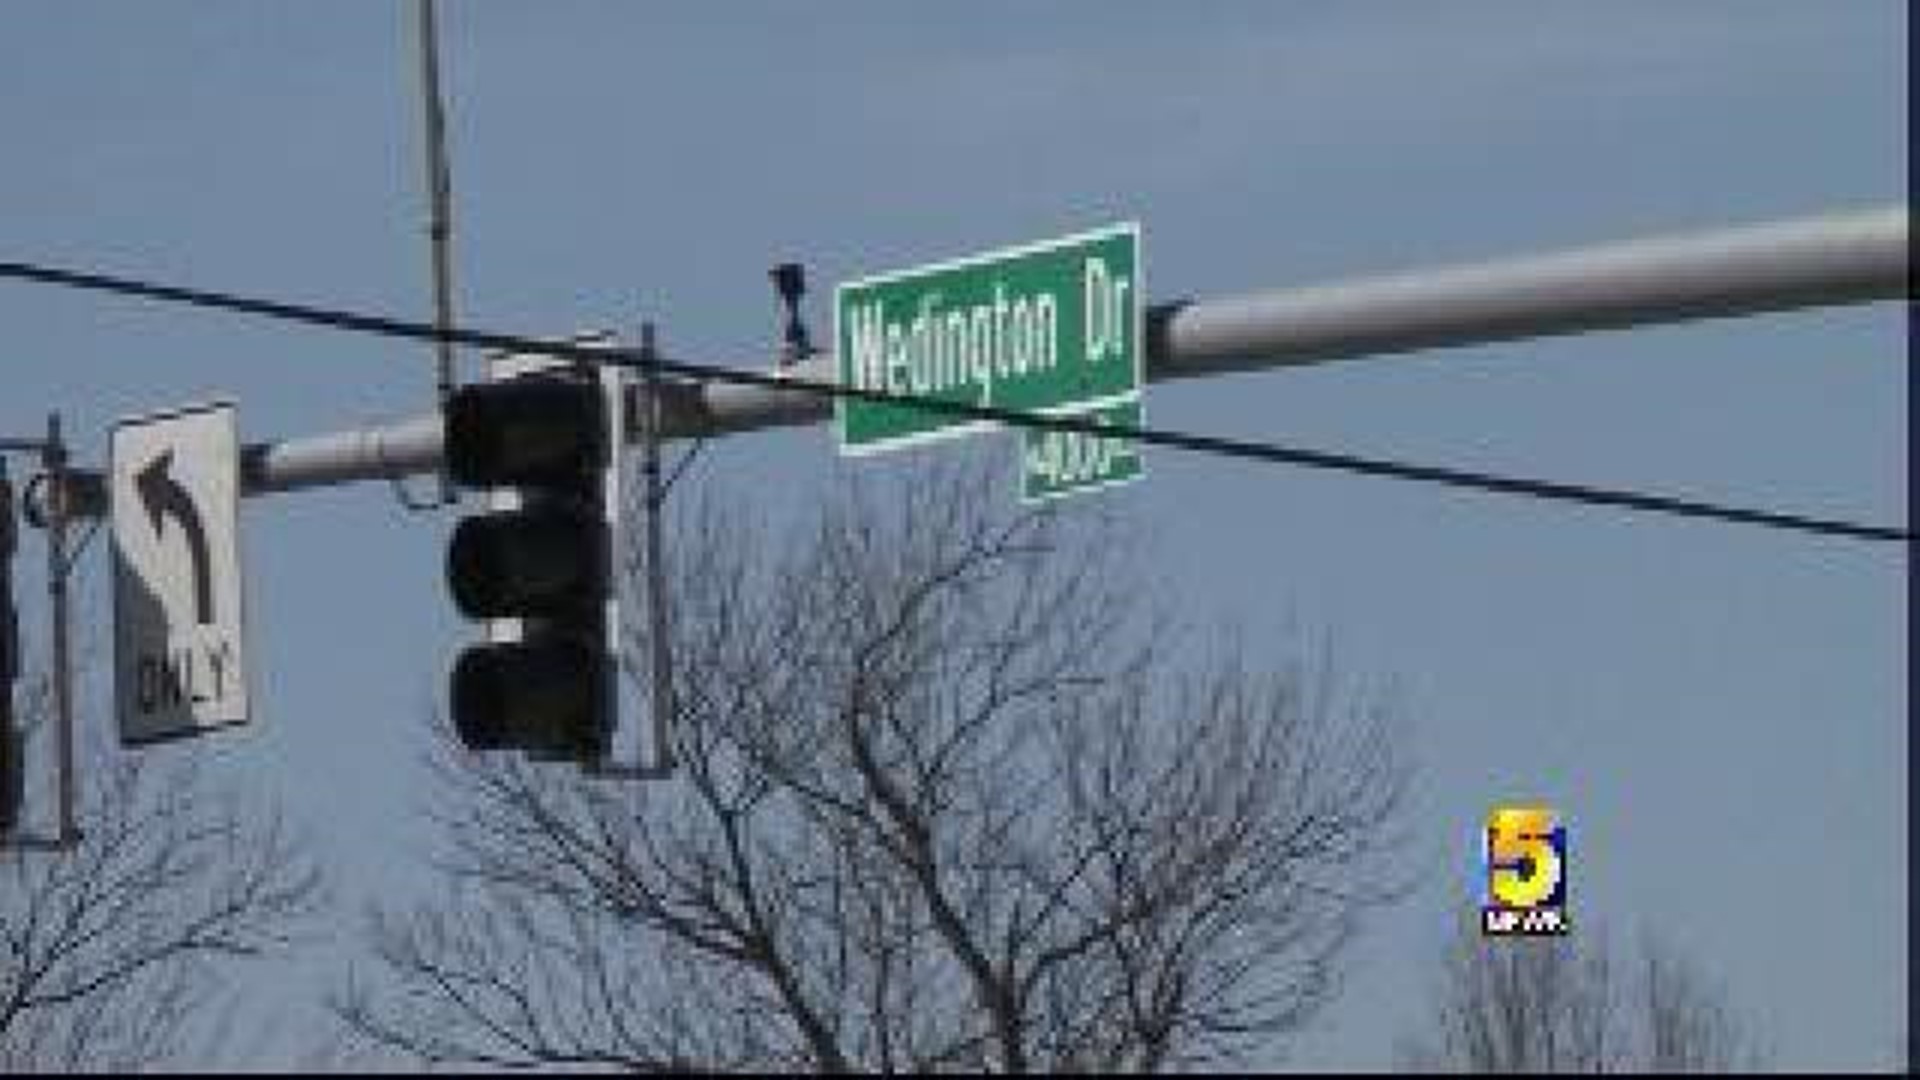 Changes Coming To Wedington Drive